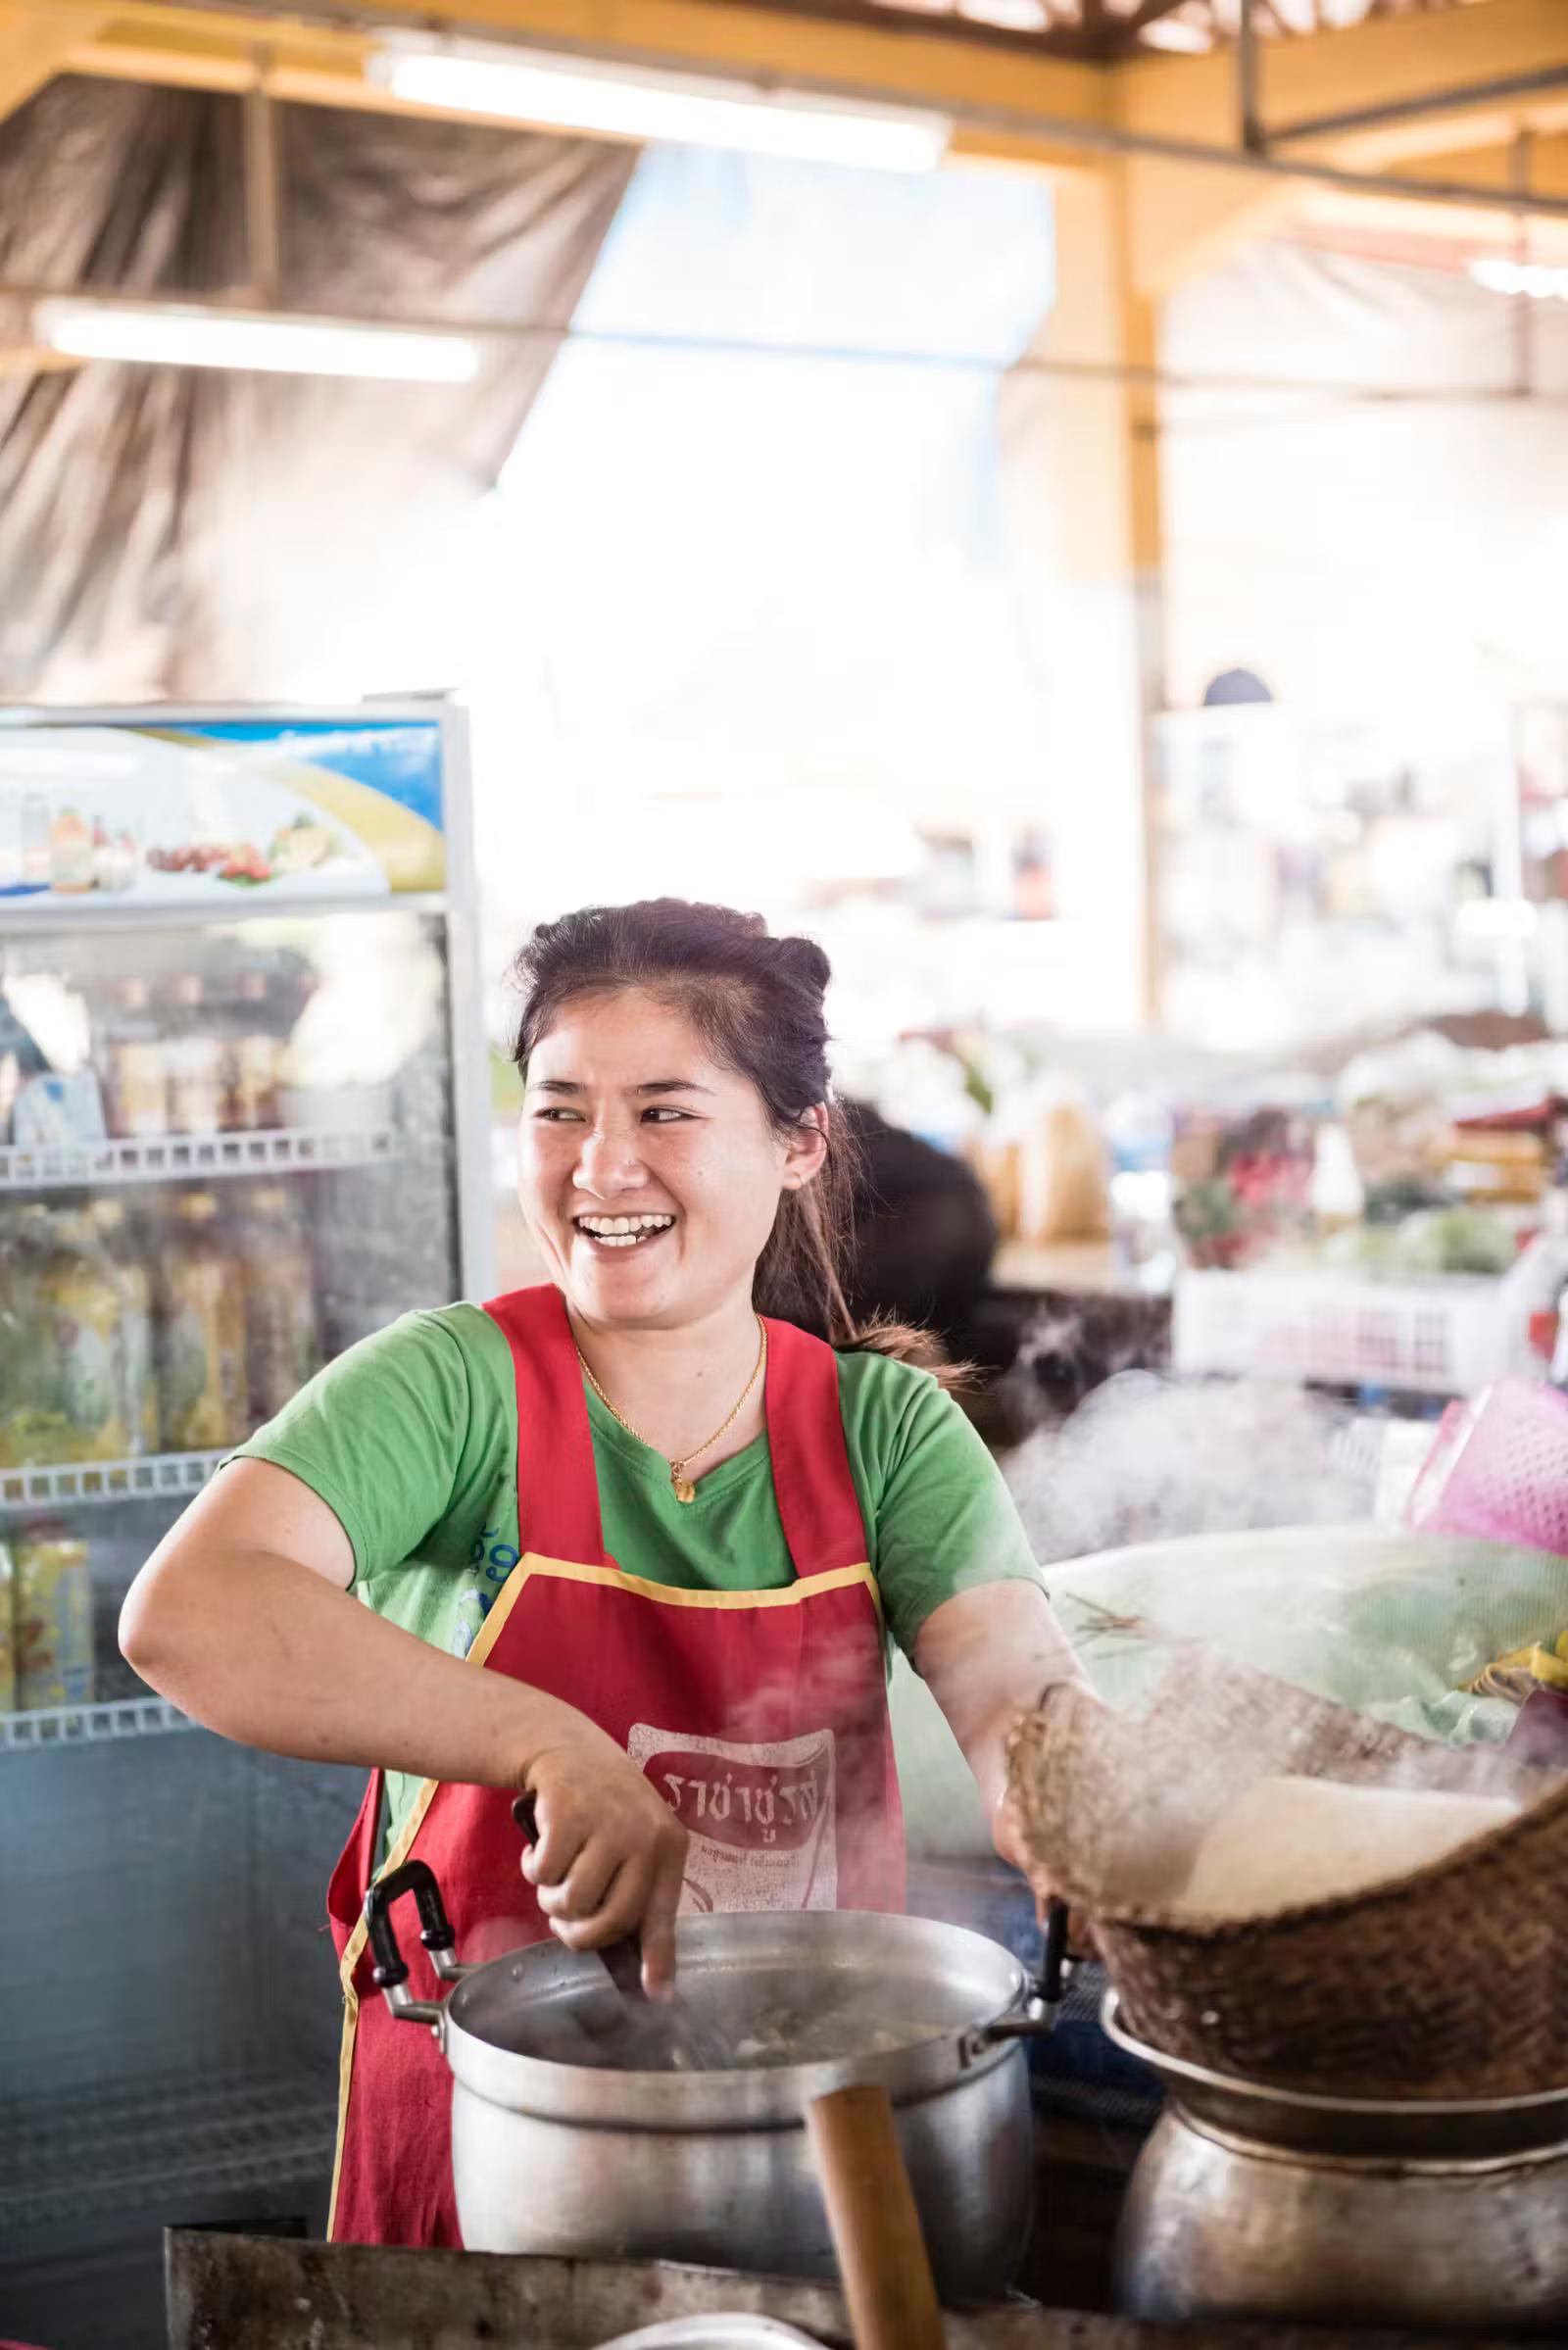 Mrs Nang serves her speciality, khao poon, or noodle soup, in the market at Paksong 